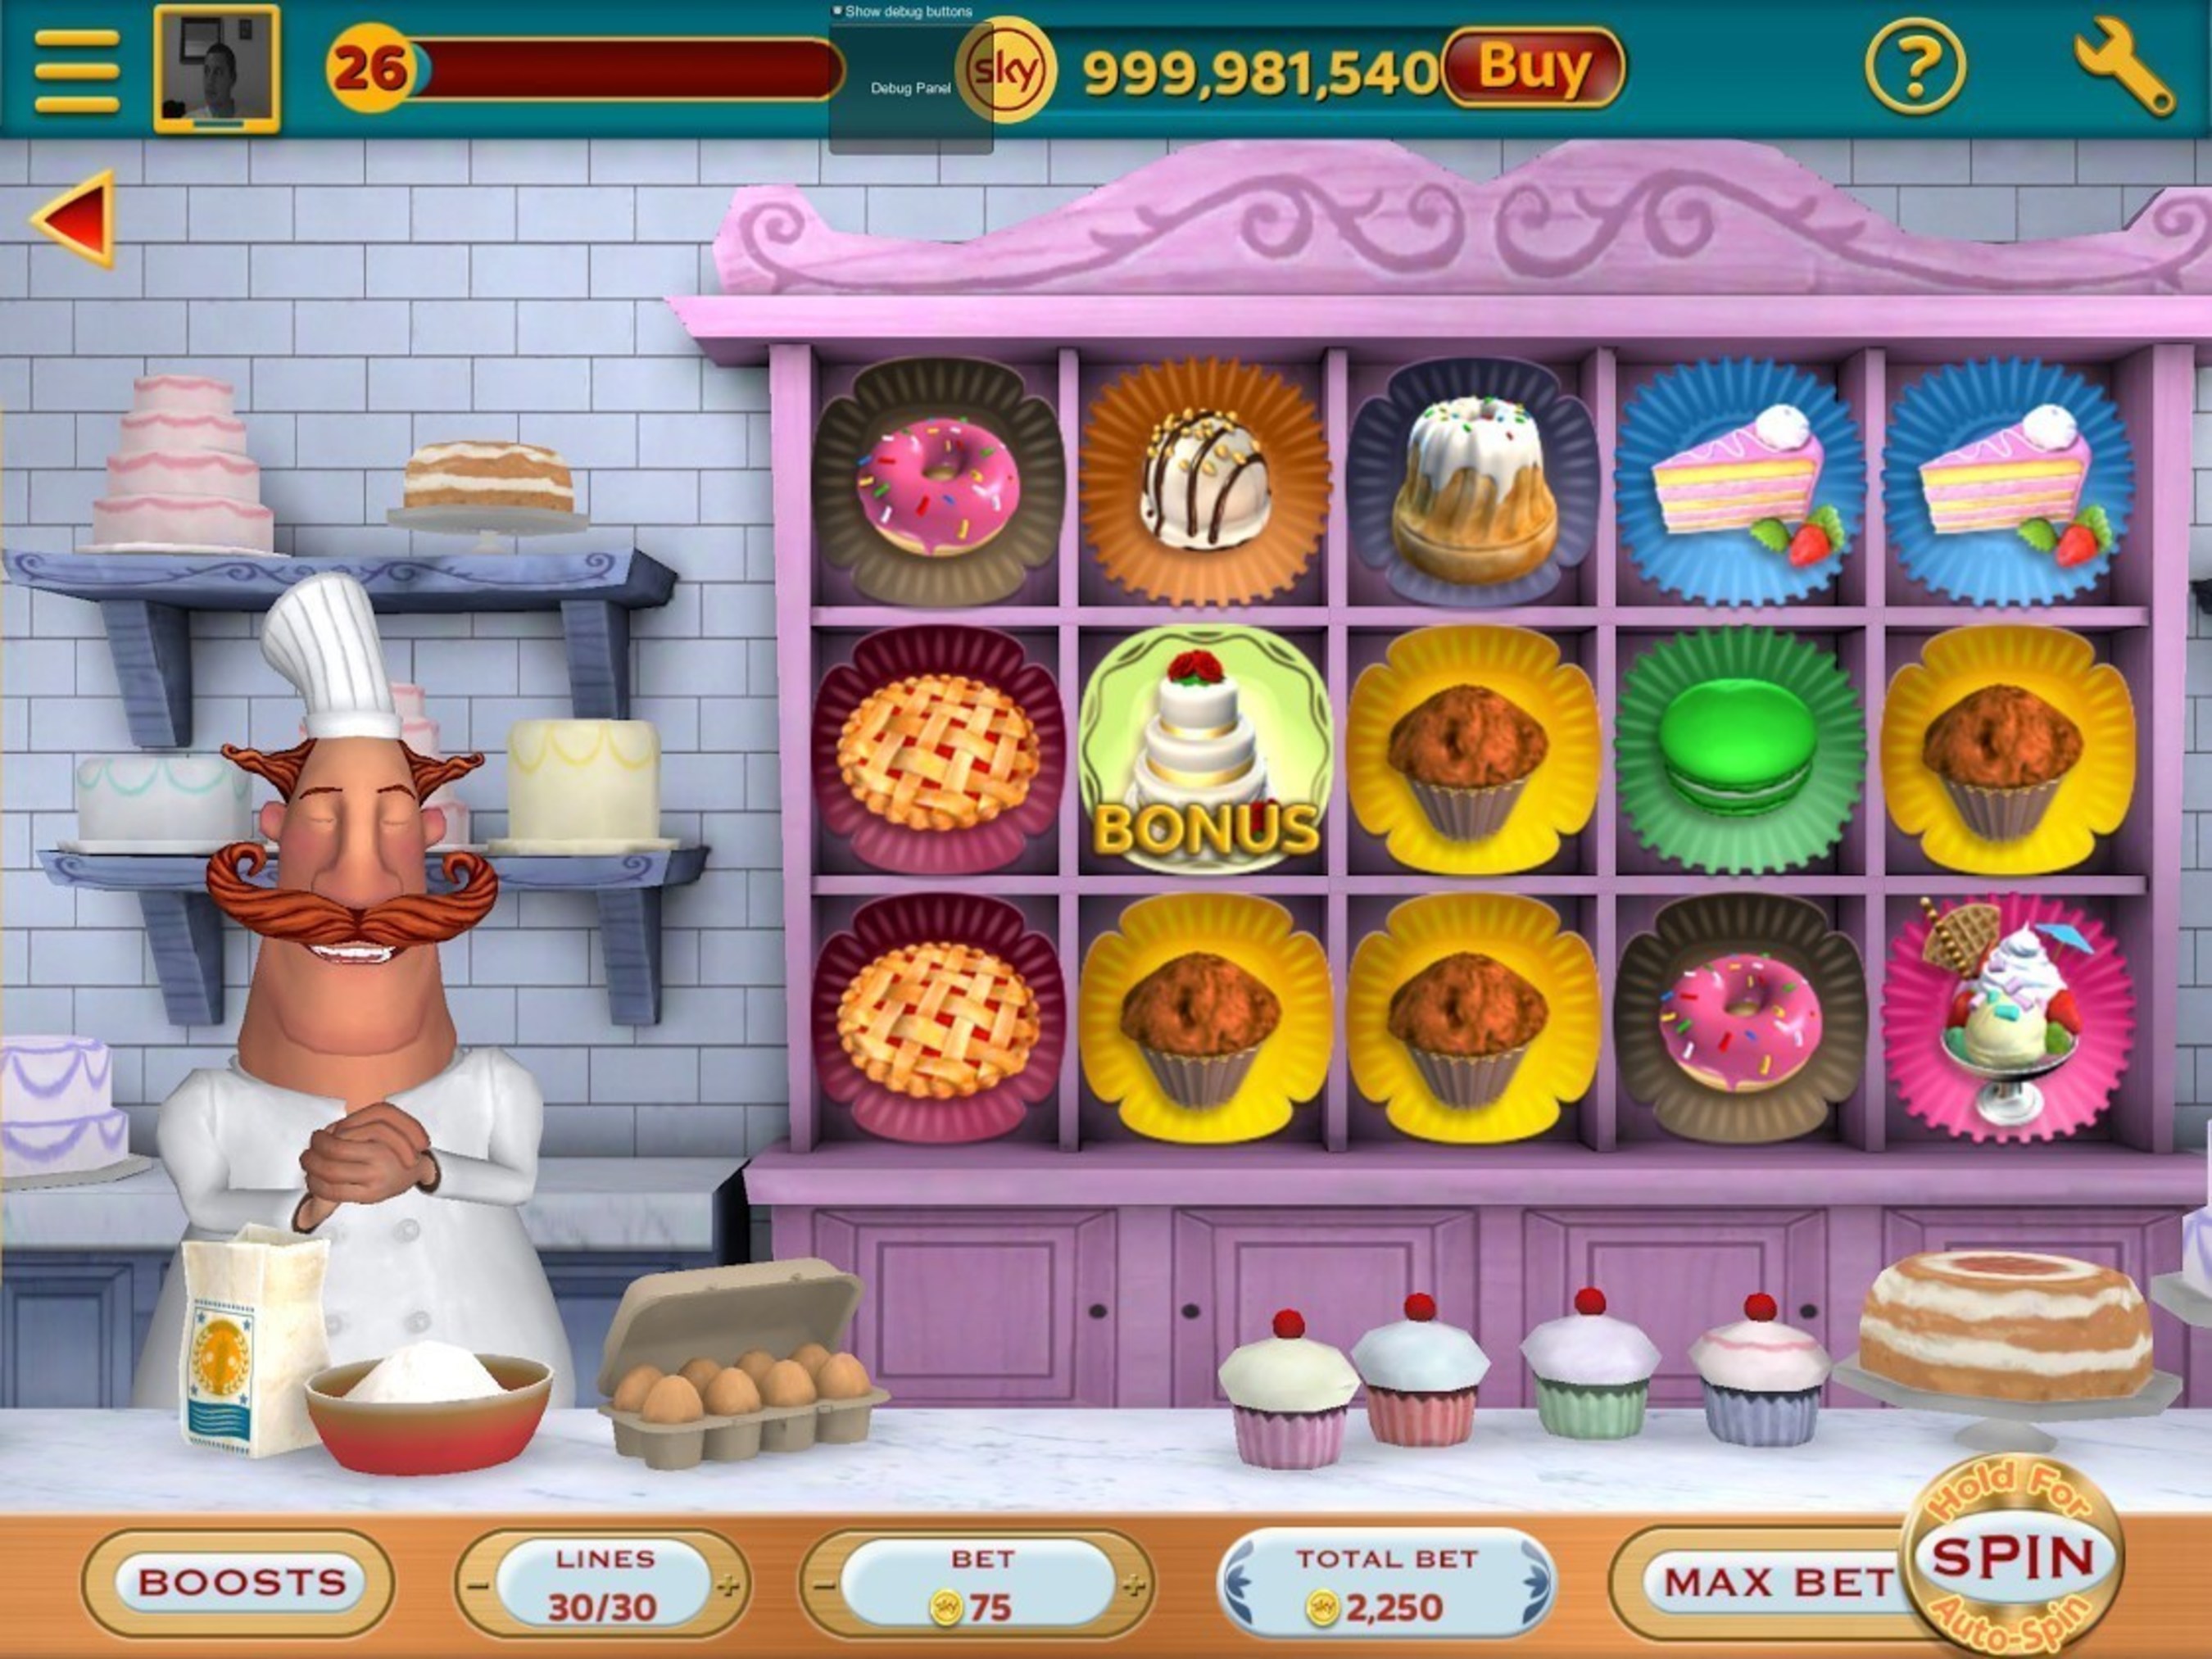 Cake Off: Got a sweet tooth? Join chef Pierre in his kitchen and help him bake a delicious range of cakes and desserts. Get the right mix and unlock our newest bonus game, piling up the pastries for bigger and bigger rewards!